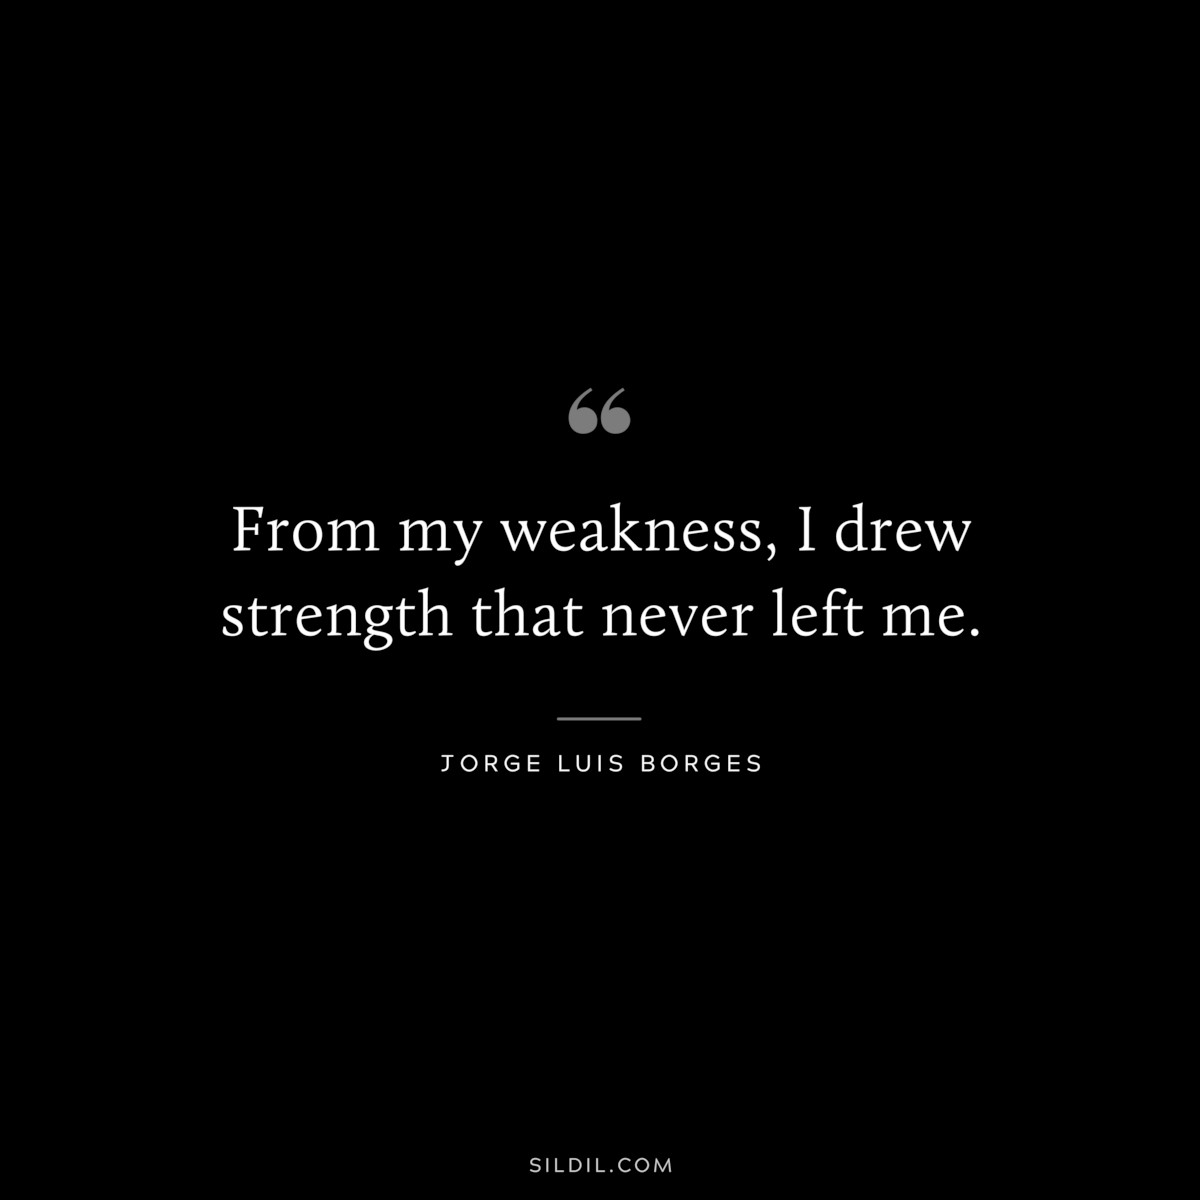 From my weakness, I drew strength that never left me. ― Jorge Luis Borges